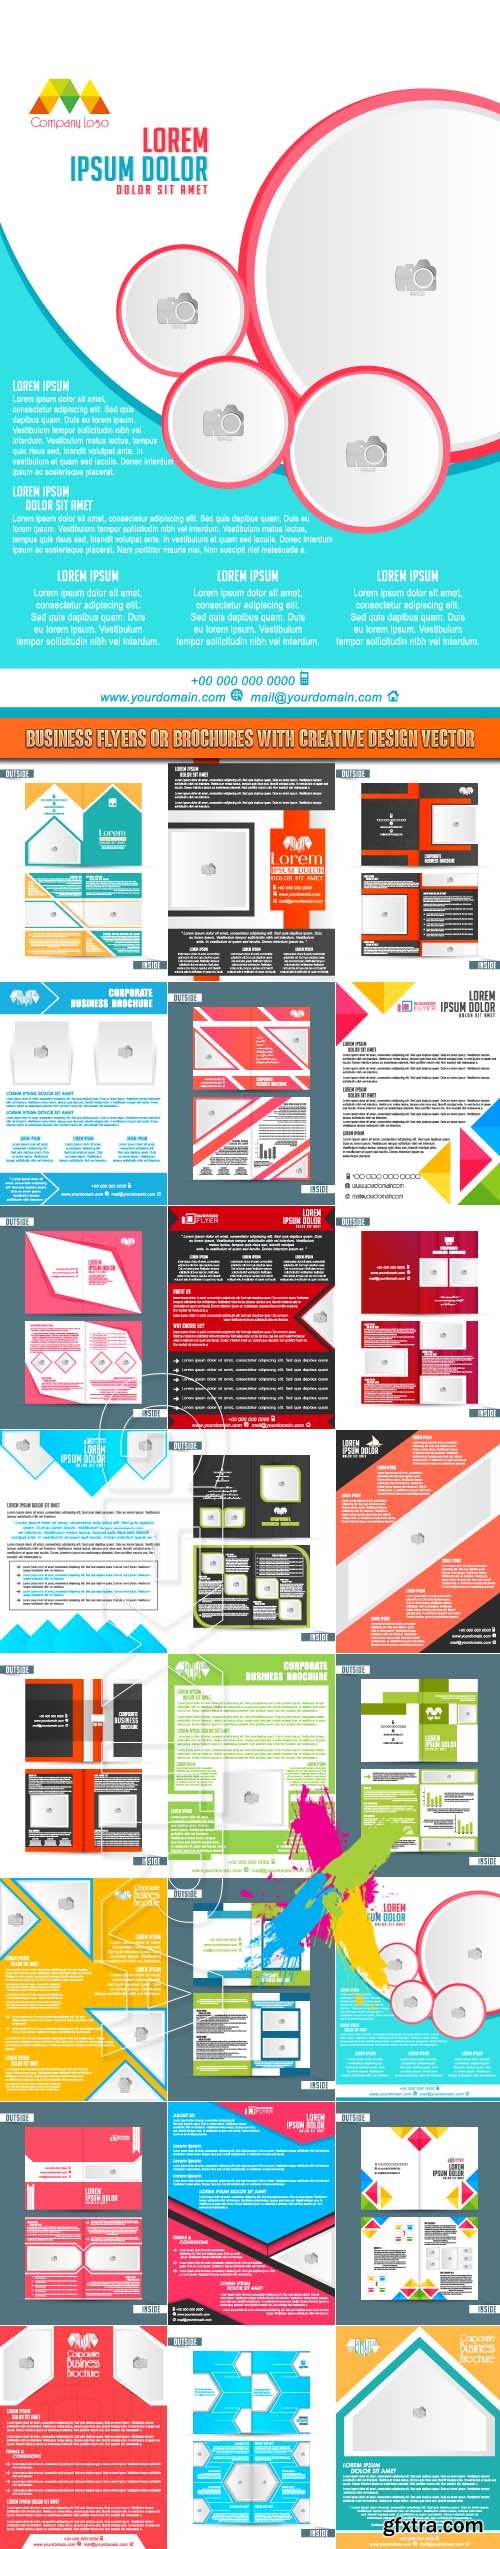 Business flyers or brochures with creative design vector